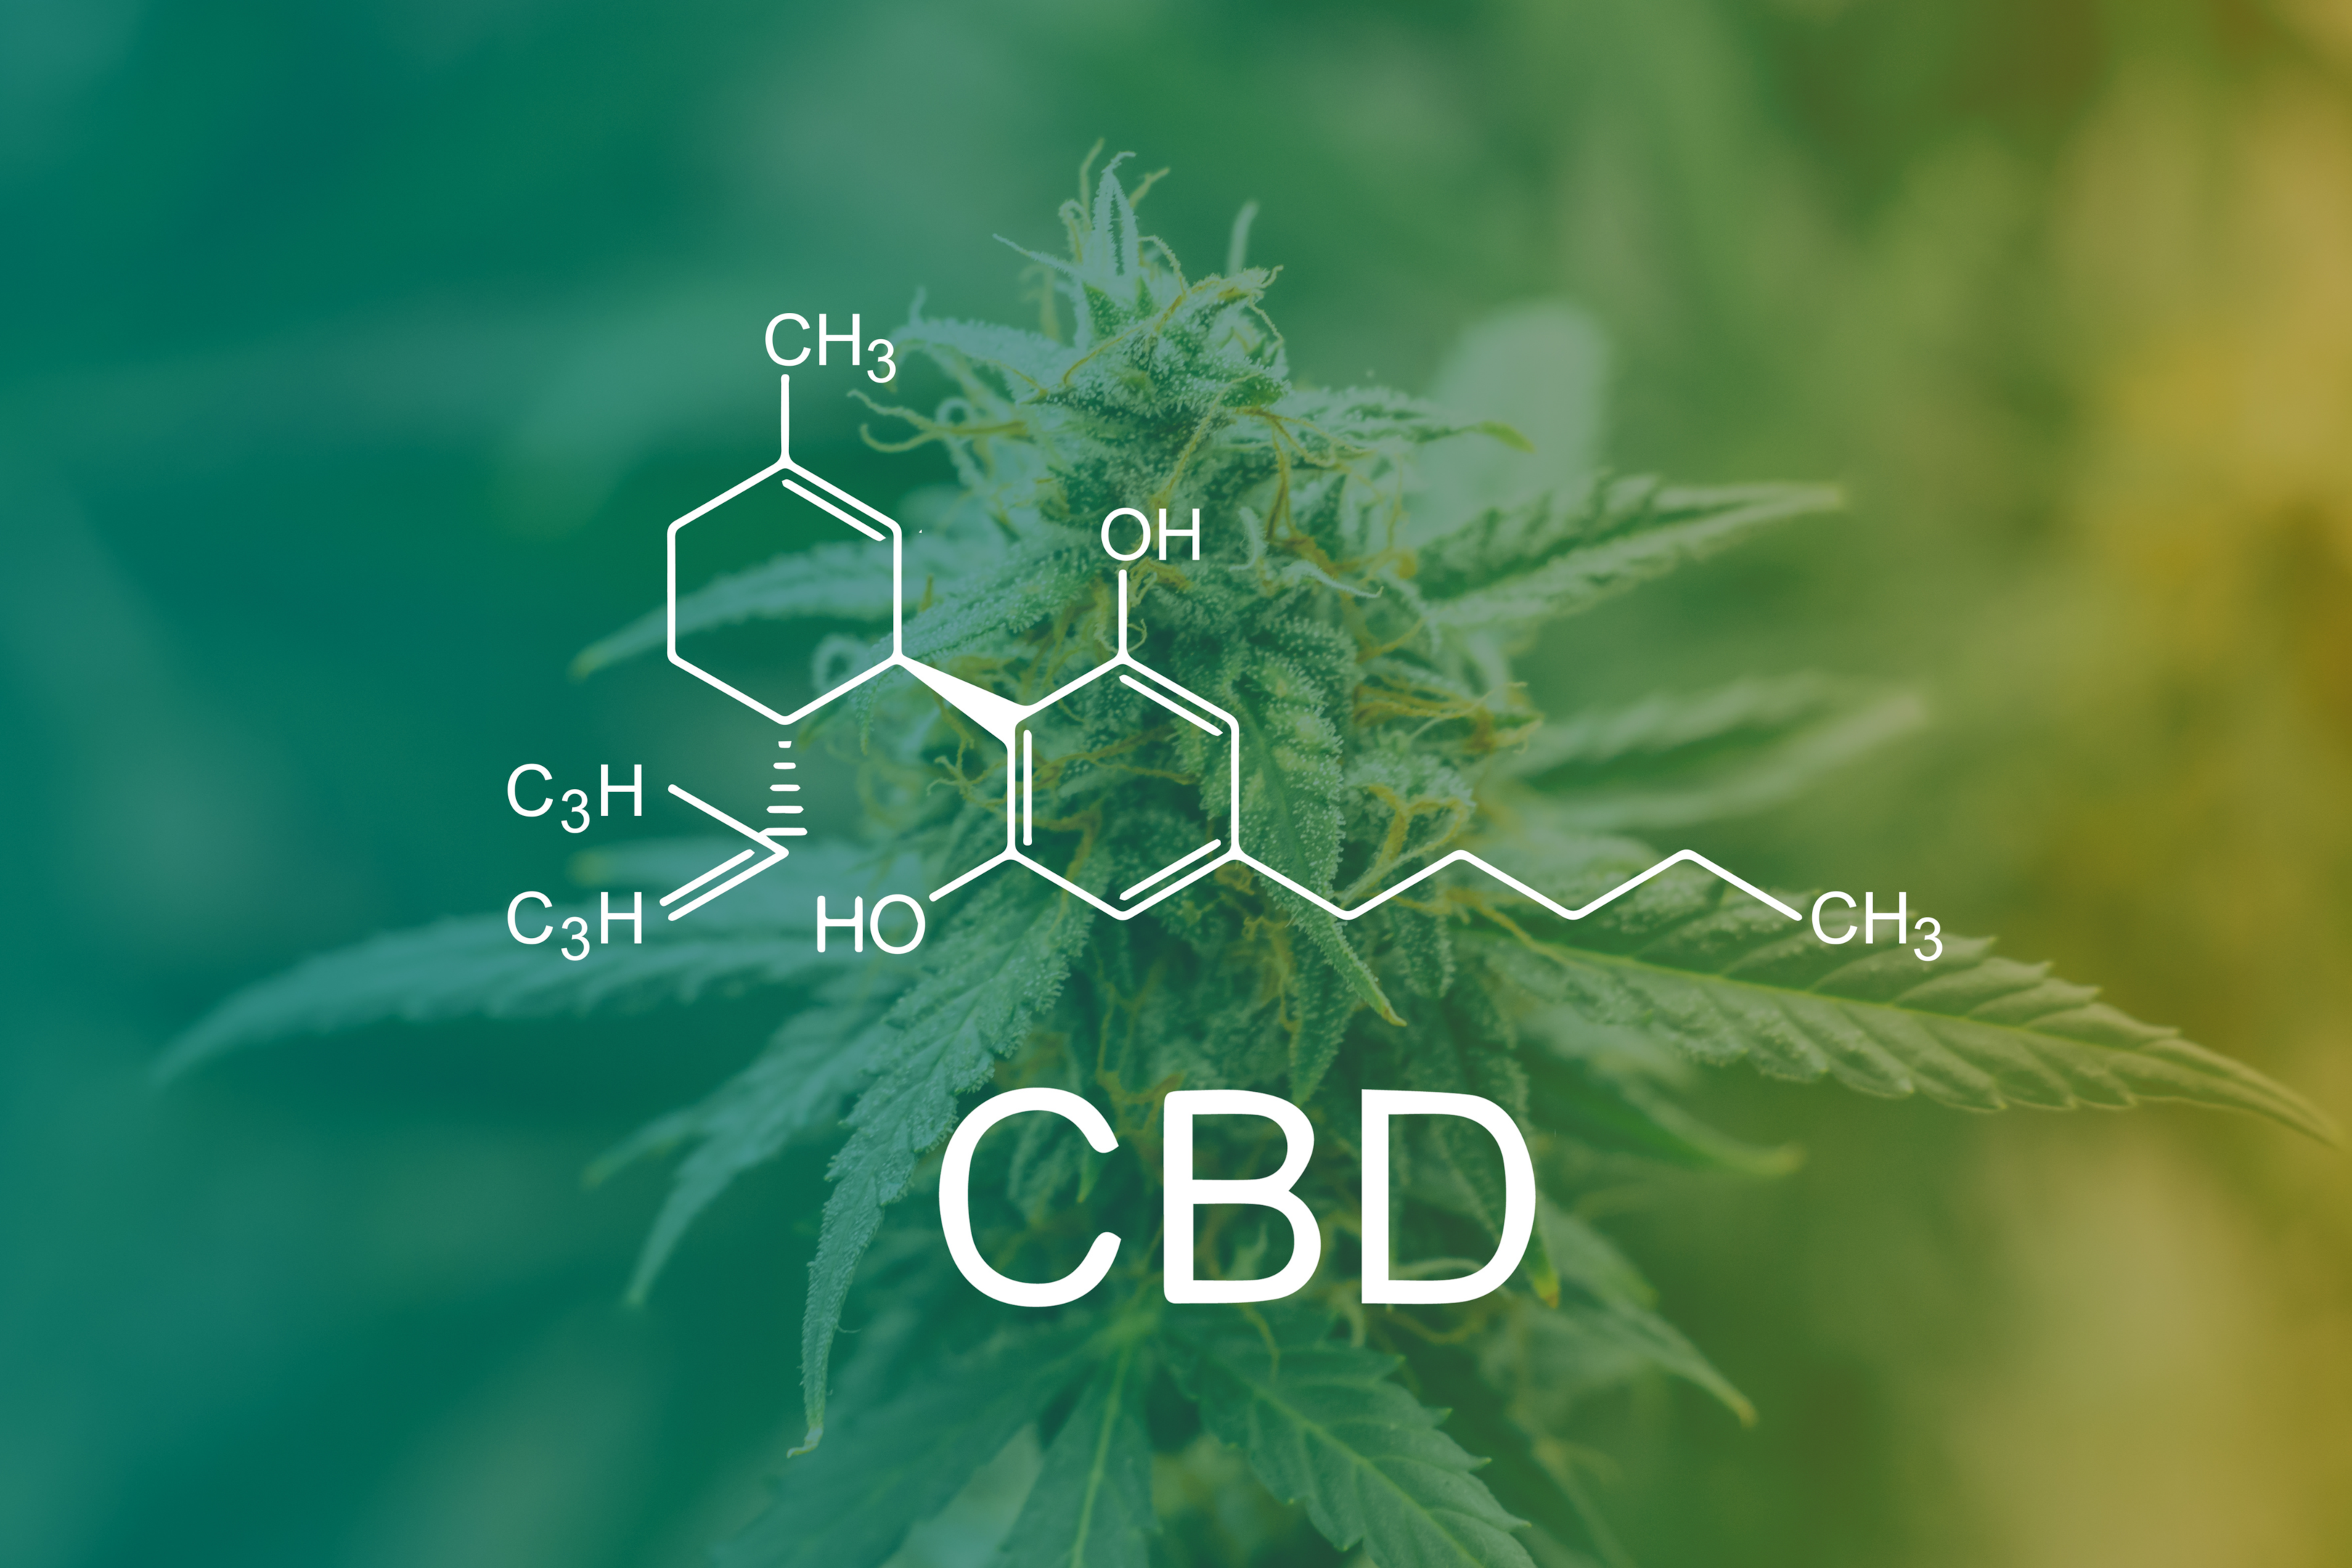 We have various types of CBD products like full spectrum and broad spectrum. Full spectrum does contain the legal amount of THC, which some report has been more beneficial. CBD is not psychoactive like Delta 8 or D9 THC.